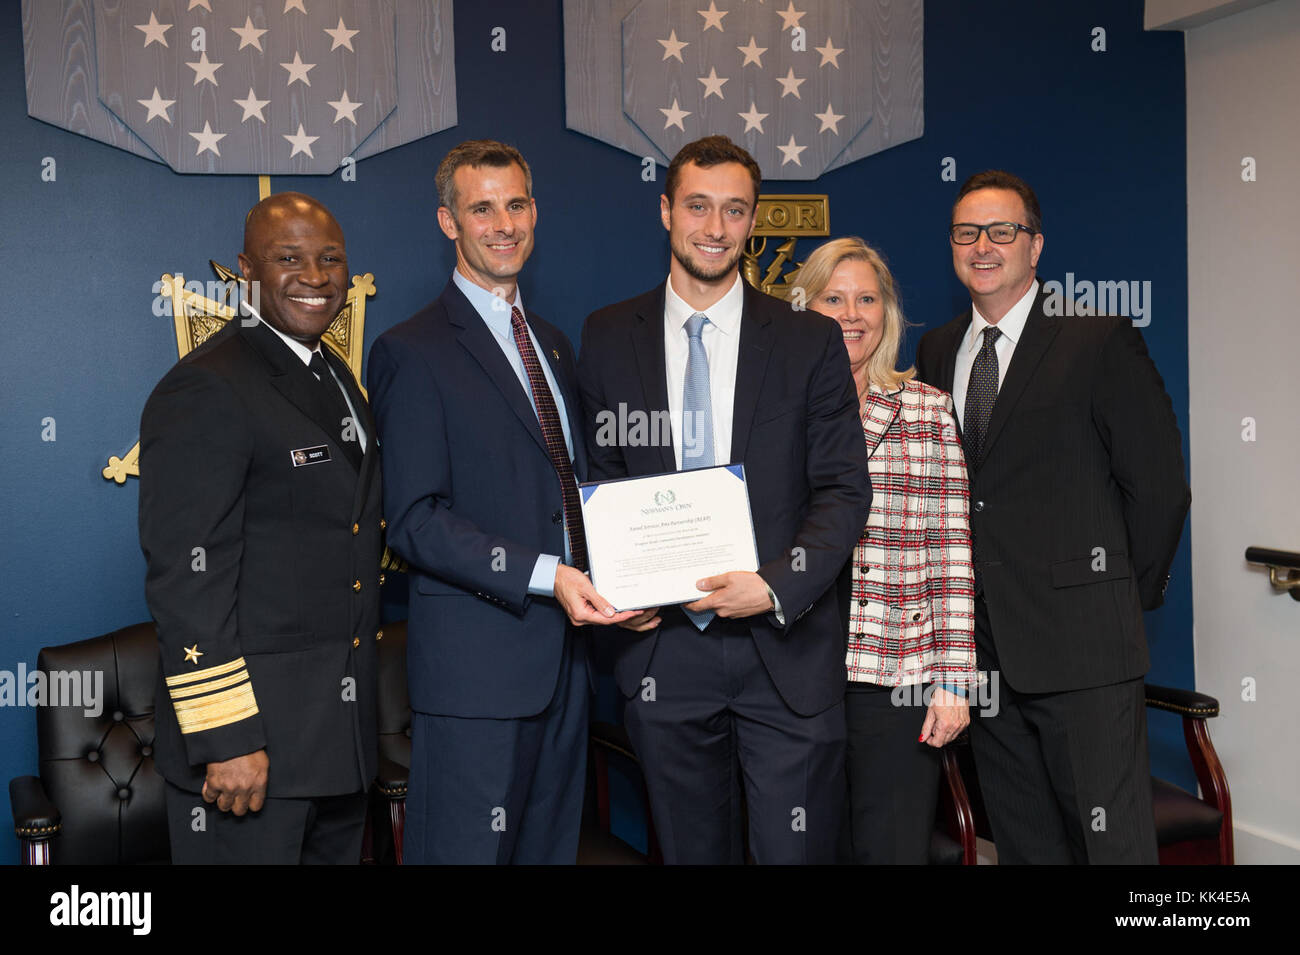 Sam Pressler, Founder and Executive Director of the Armed Services Arts Partnership (ASAP), accepts an award during the 2017 NewmanÕs Own Awards at the Hall of Heroes in the Pentagon, Oct. 11, 2017. Through ASAP, veterans reintegrate into civilian life through a collaborative, community-driven, and deeply focused program model. The annual competition seeks to reward ingenuity for programs that benefit service men, women, and their families. To date, the competition has recognized 174 programs with awards totally $1, 725,000. (DoD Photo by U.S. Army Sgt. James K. McCann) Stock Photo